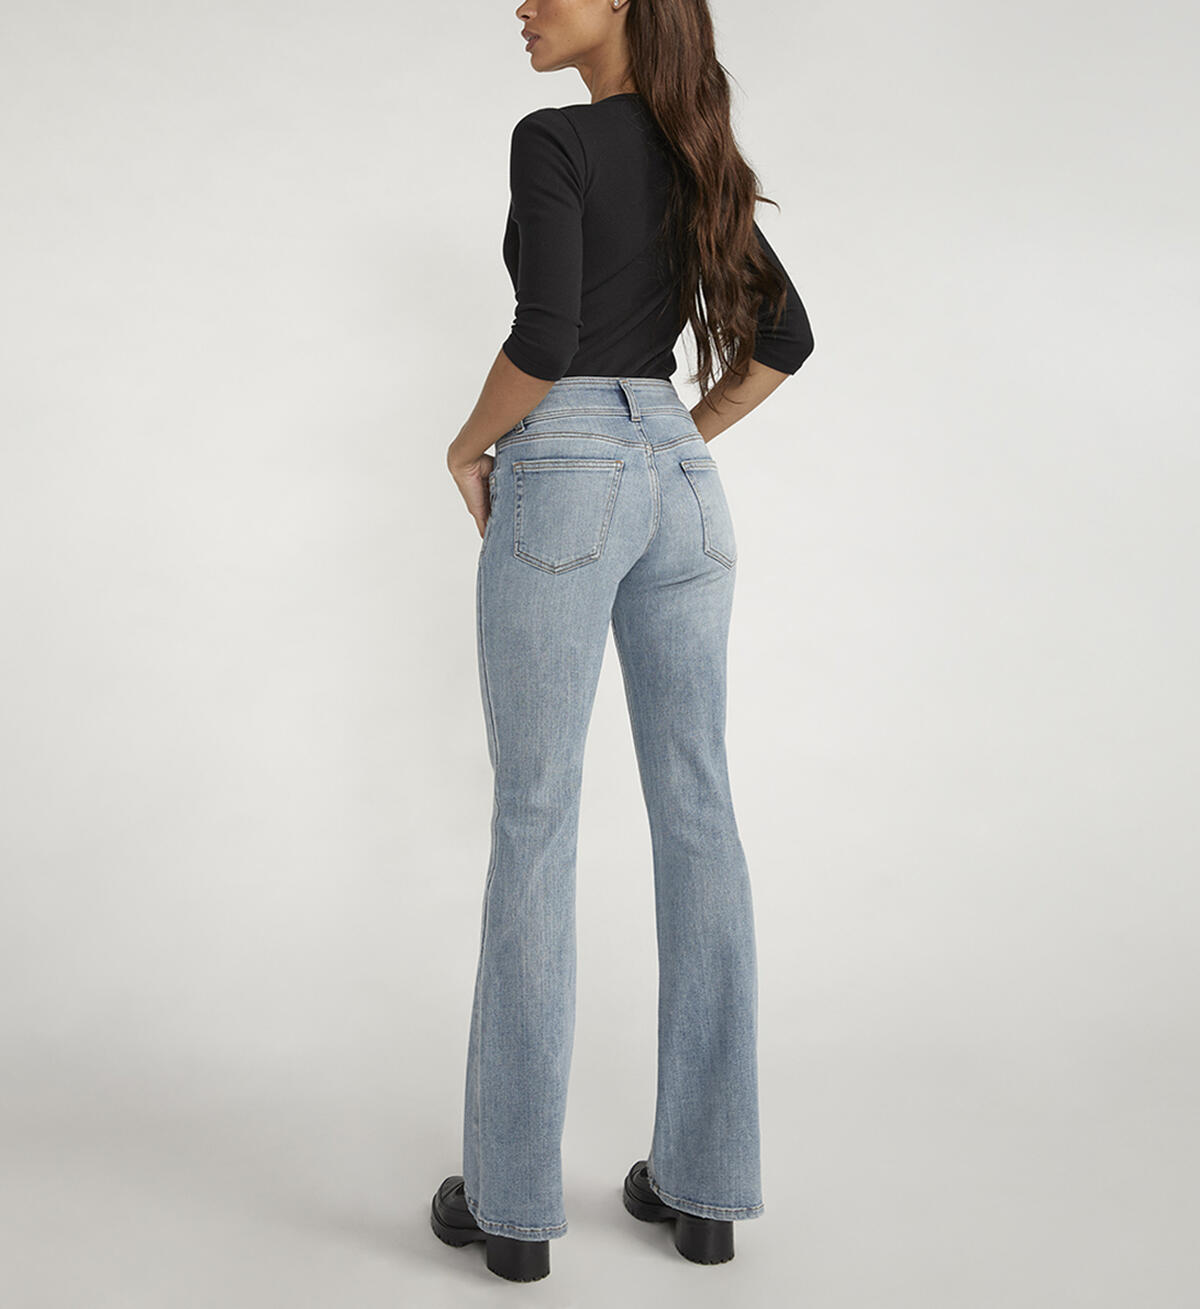 Be Low Low Rise Flare Jeans, Indigo, hi-res image number 1